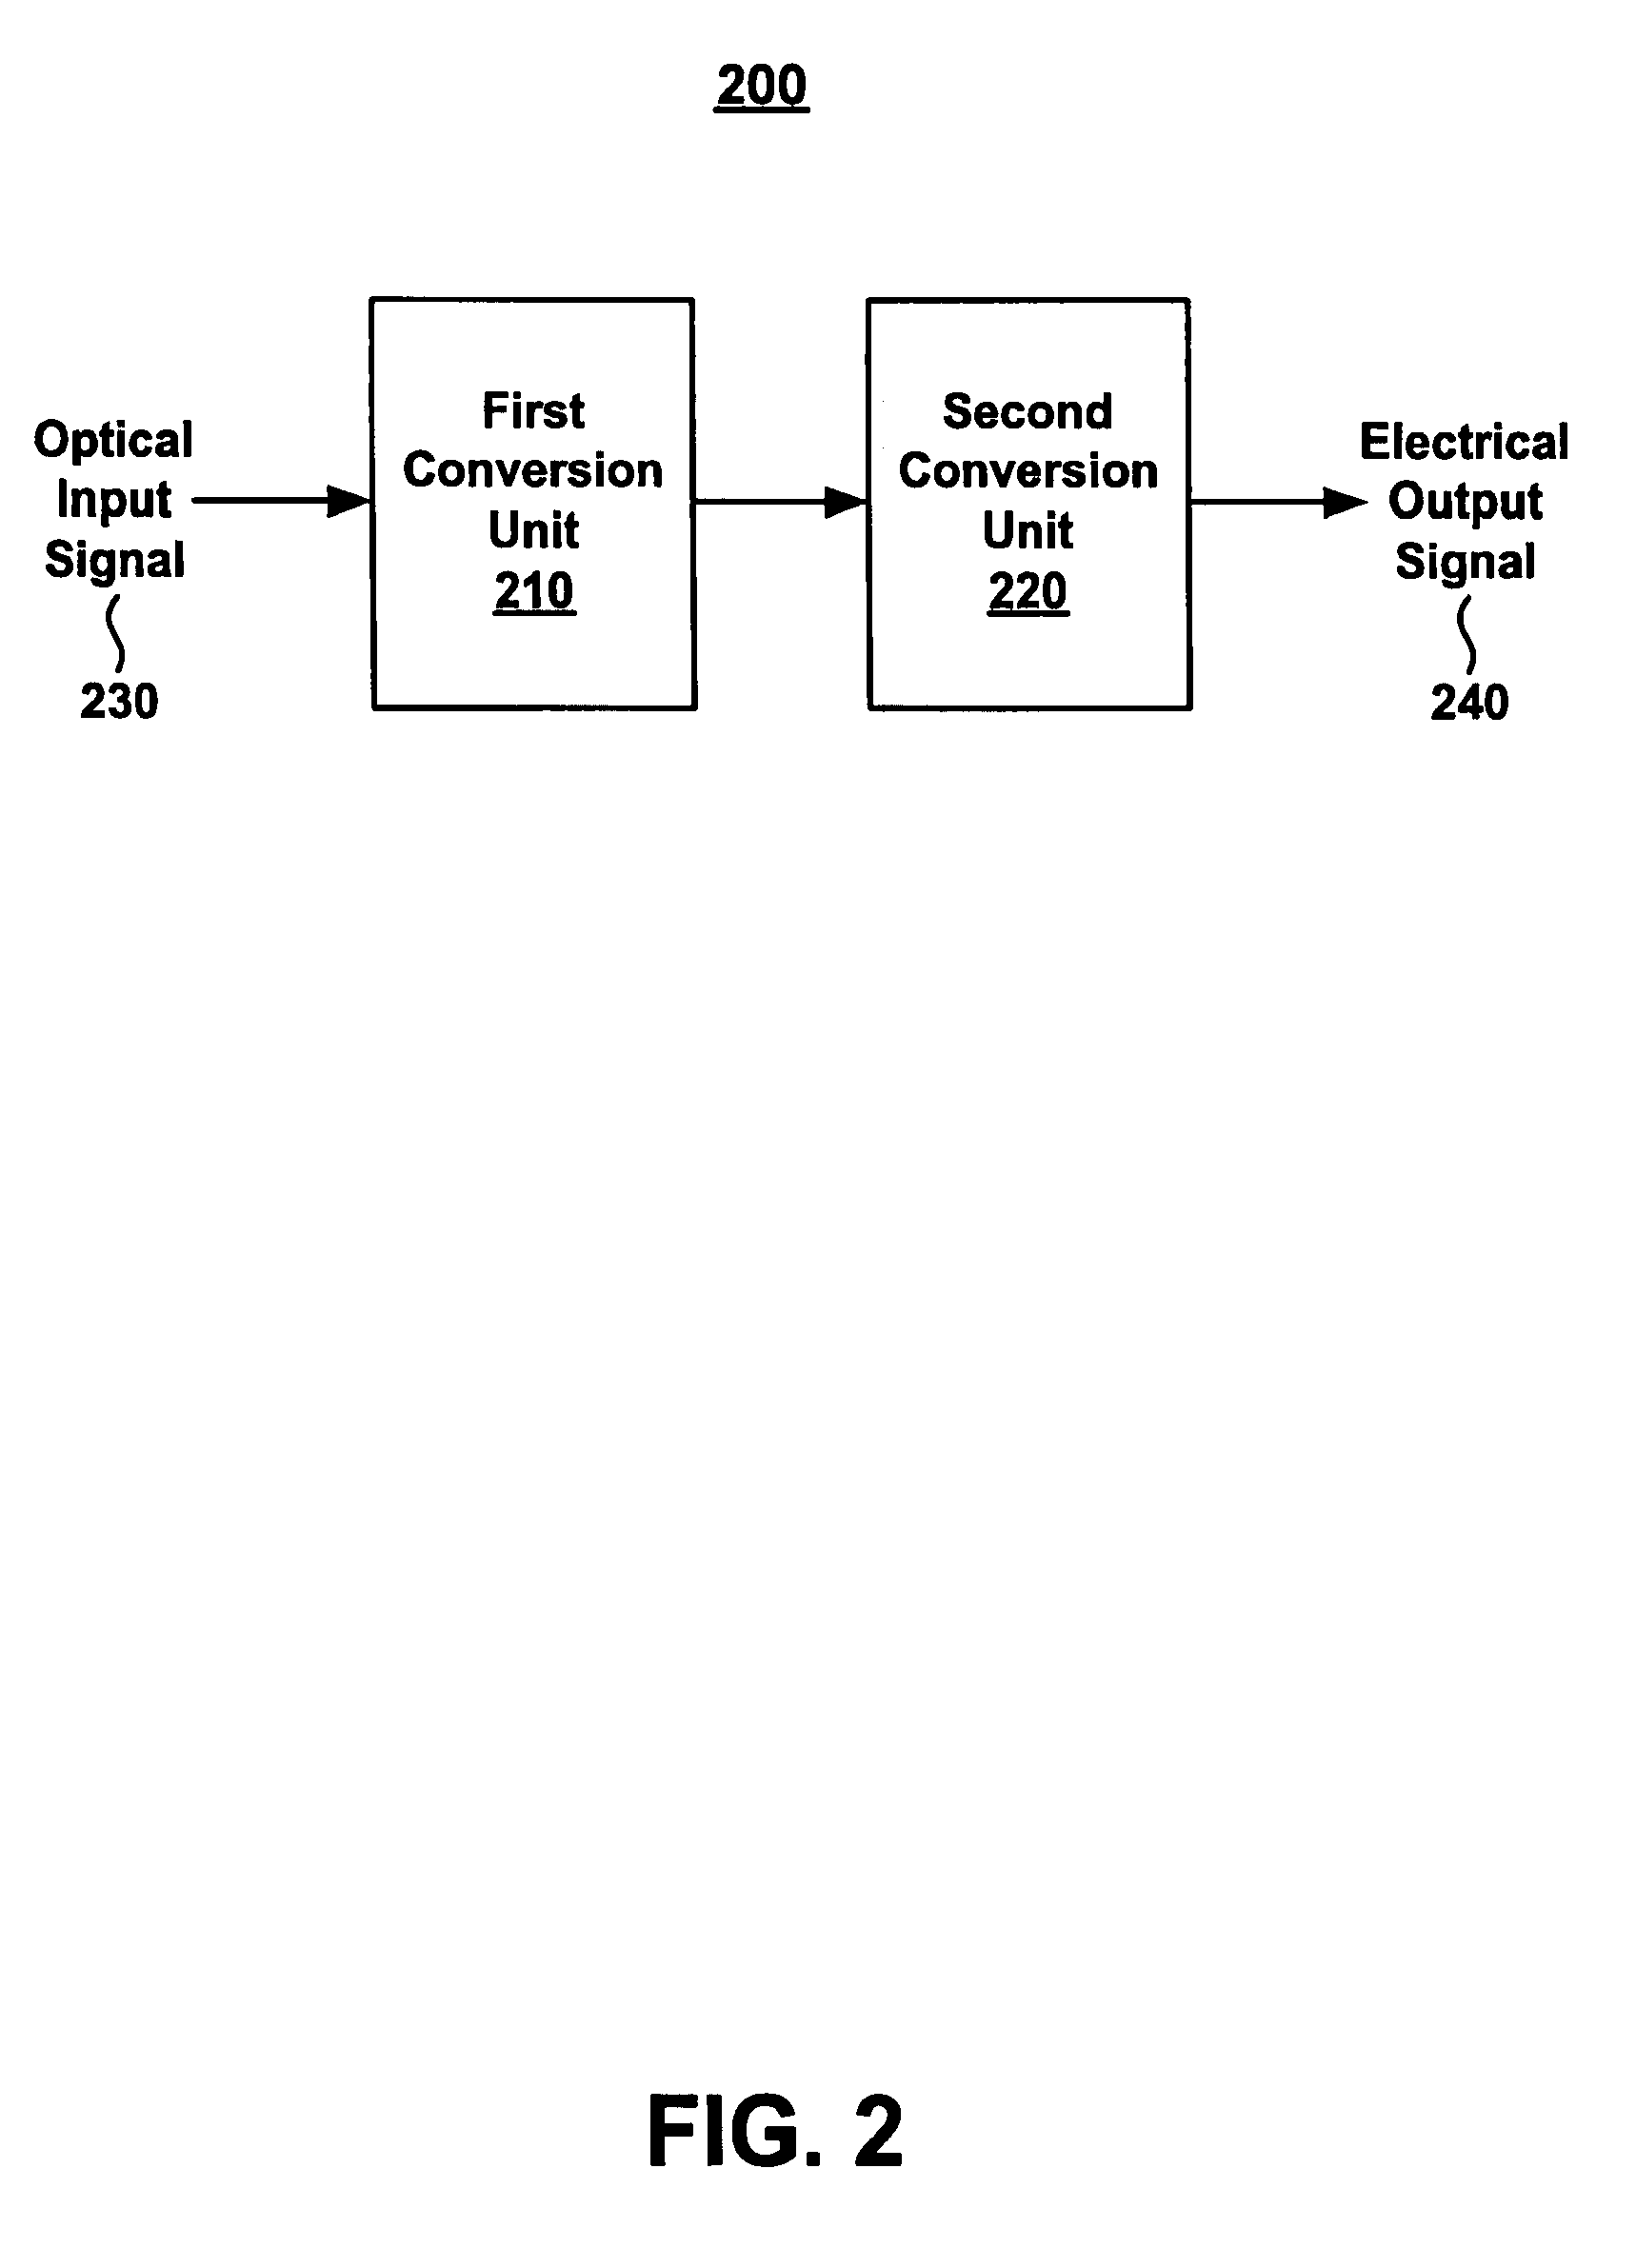 Method and system for superheterodyne detection of an optical input signal